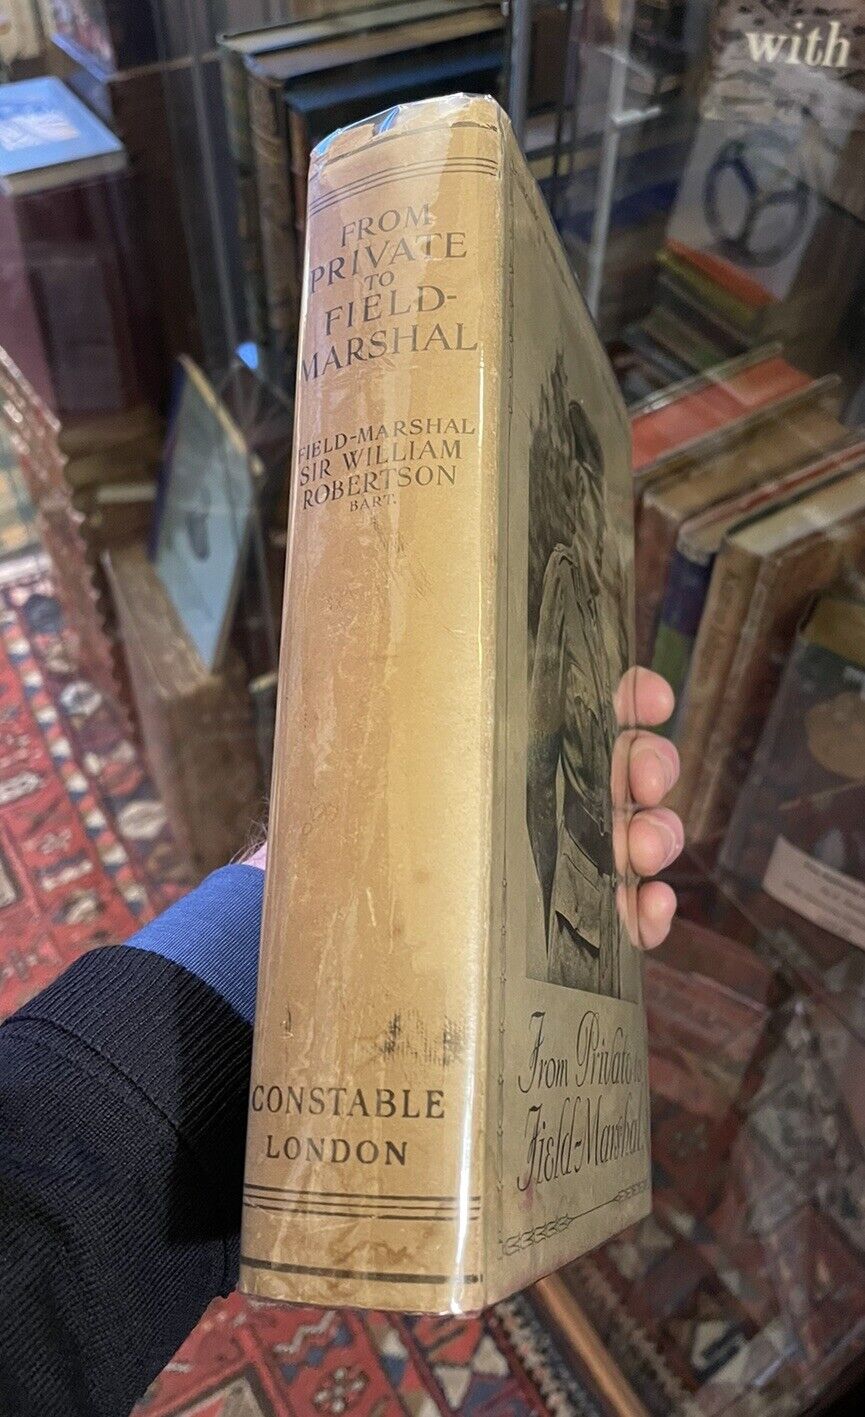 From Private to Field-Marshal : Sir William Robertson ; 1921 with Dust Jacket